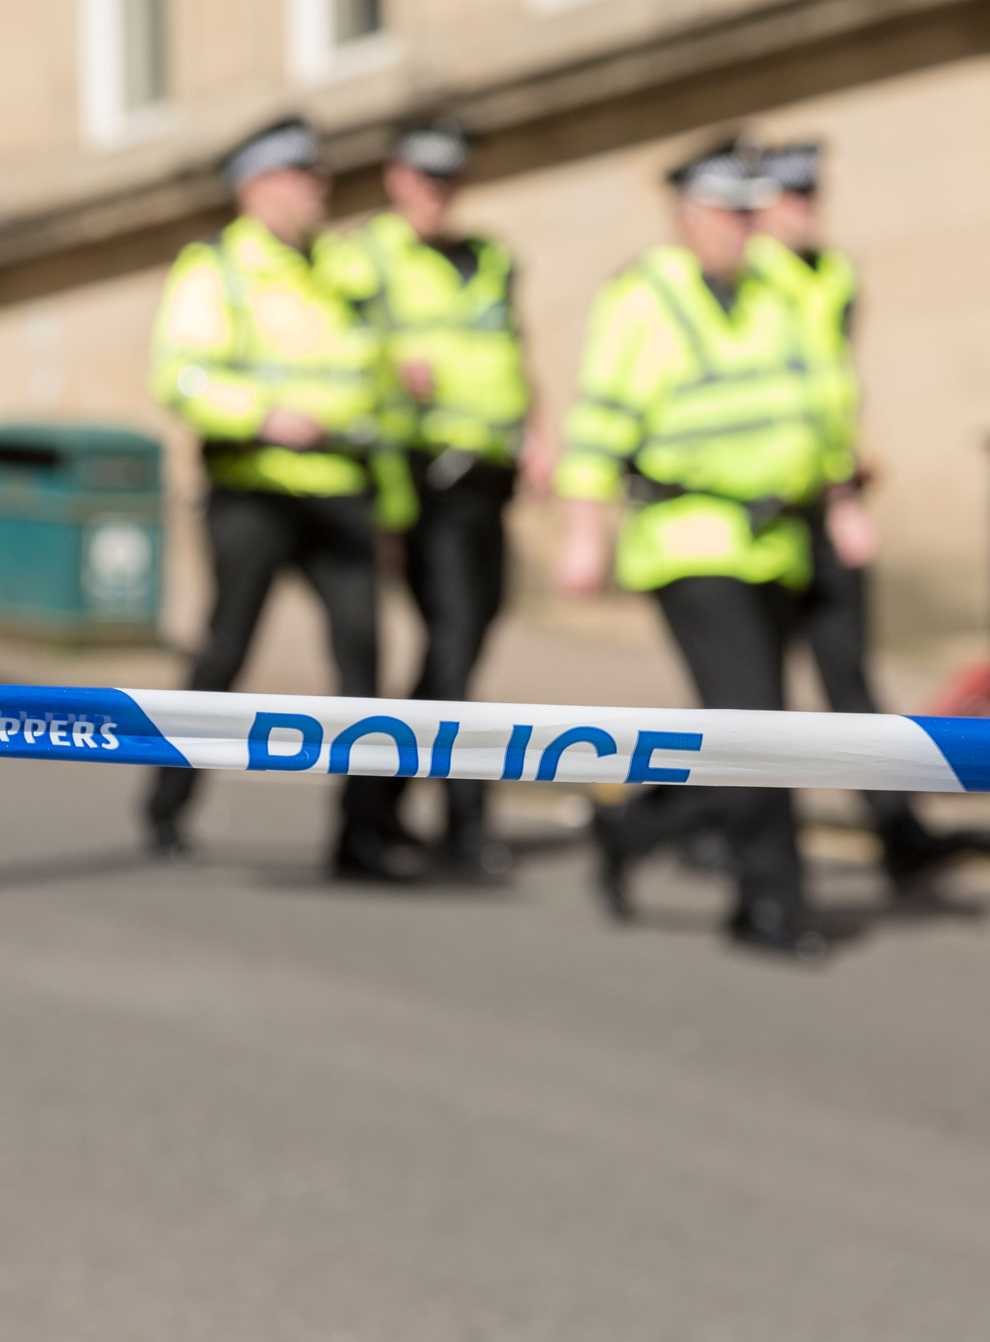 Police forces in England and Wales have recorded the highest number of crimes in 20 years, driven by a sharp rise in offences including fraud, rape and violent attacks (Alamy/PA)